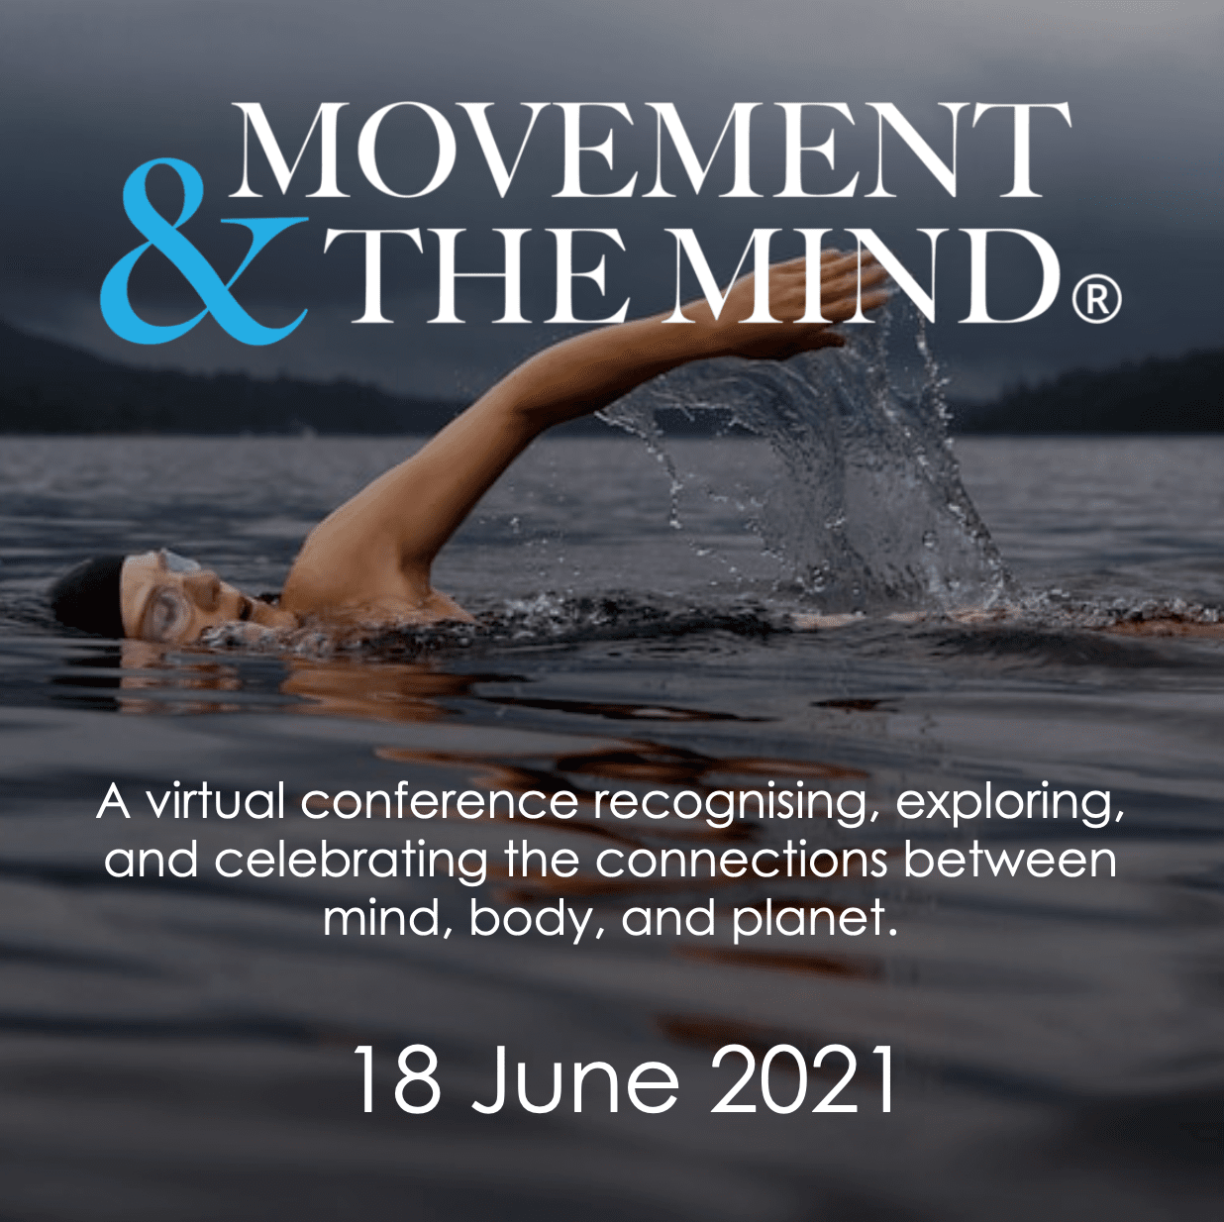 Movement the mind